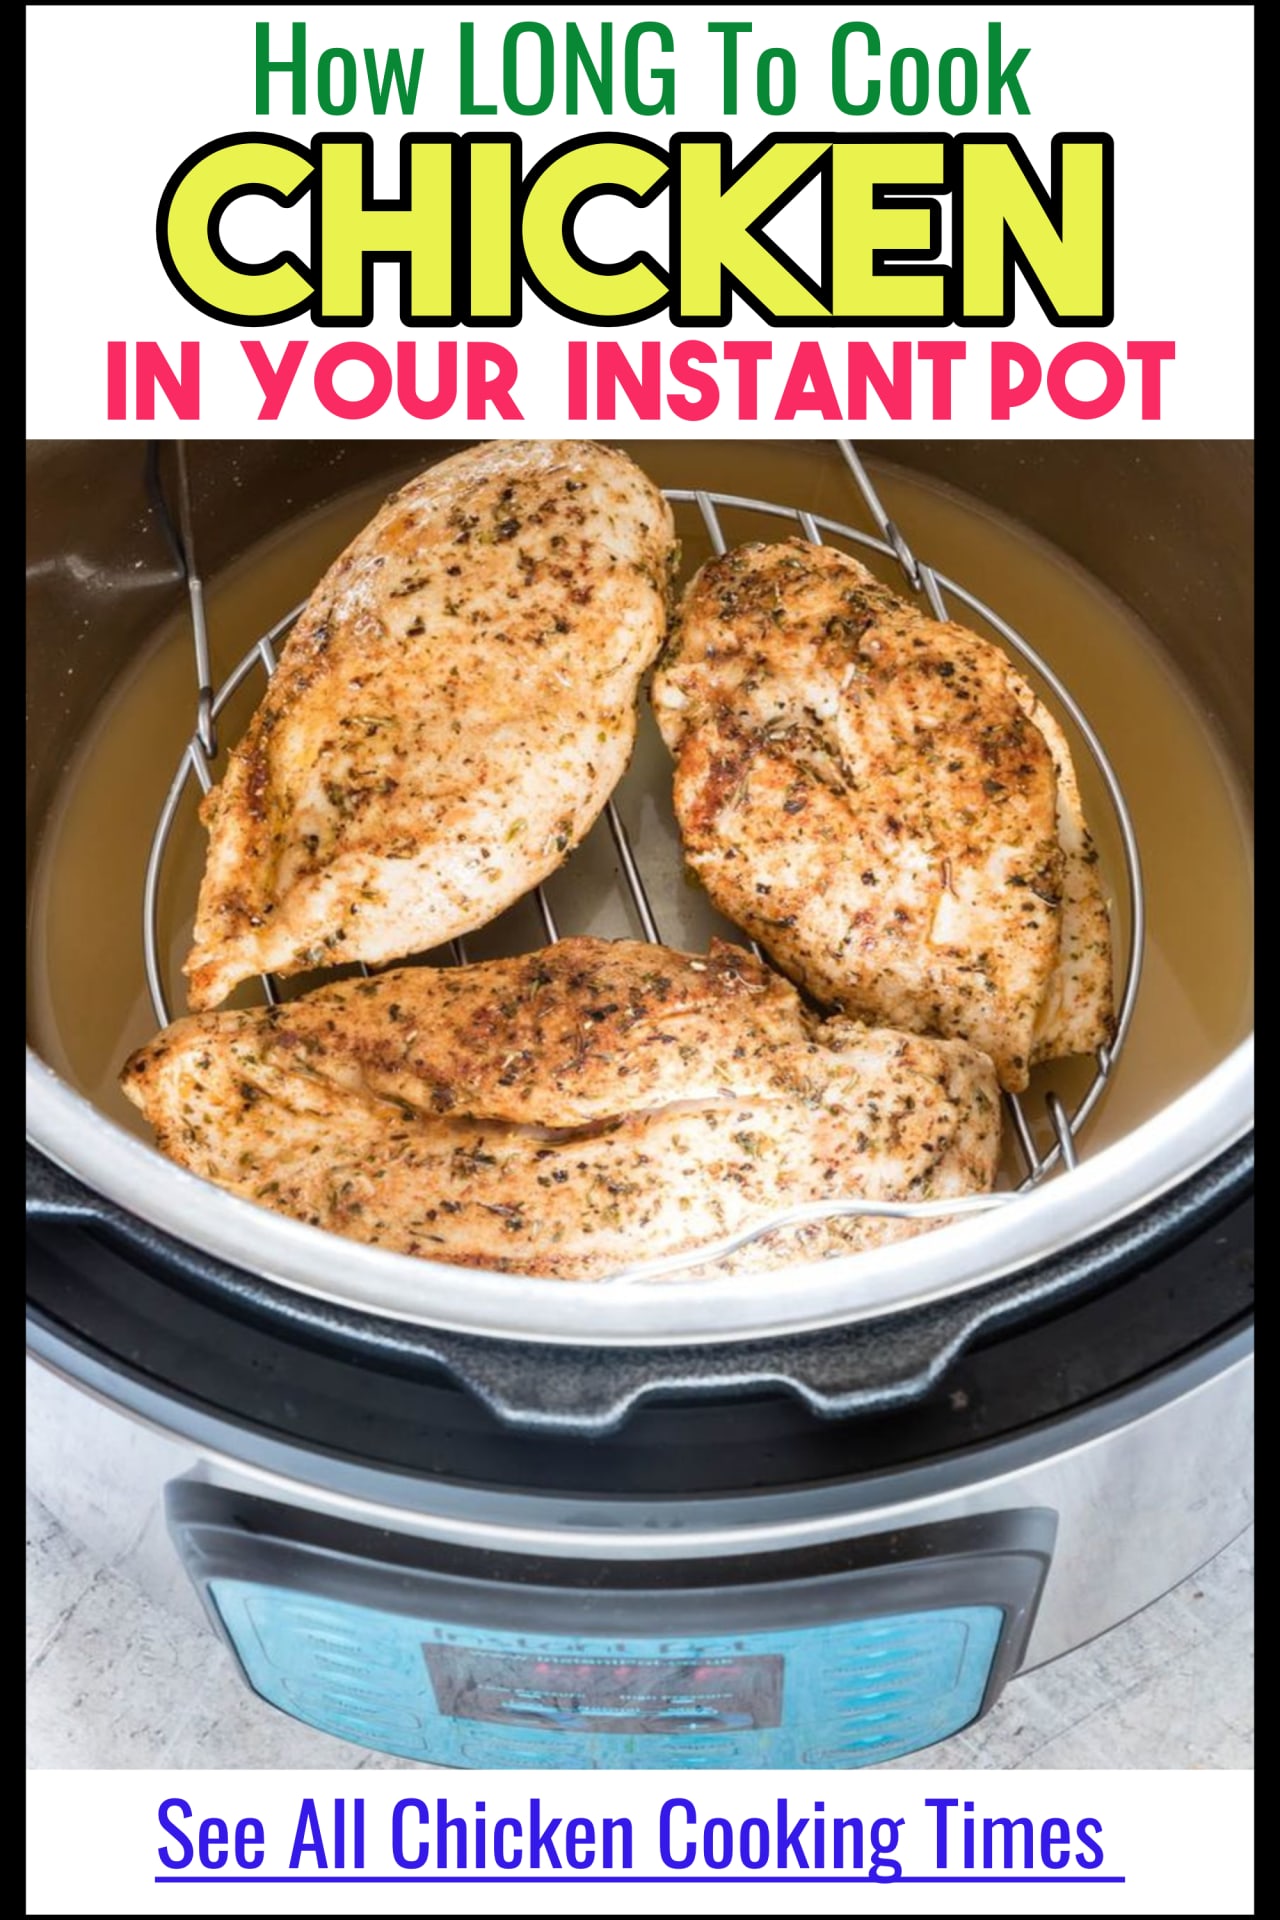 Instant Pot Cooking Times Chart - How Long To Cook Chicken In your Instant Pot Pressure Cooker